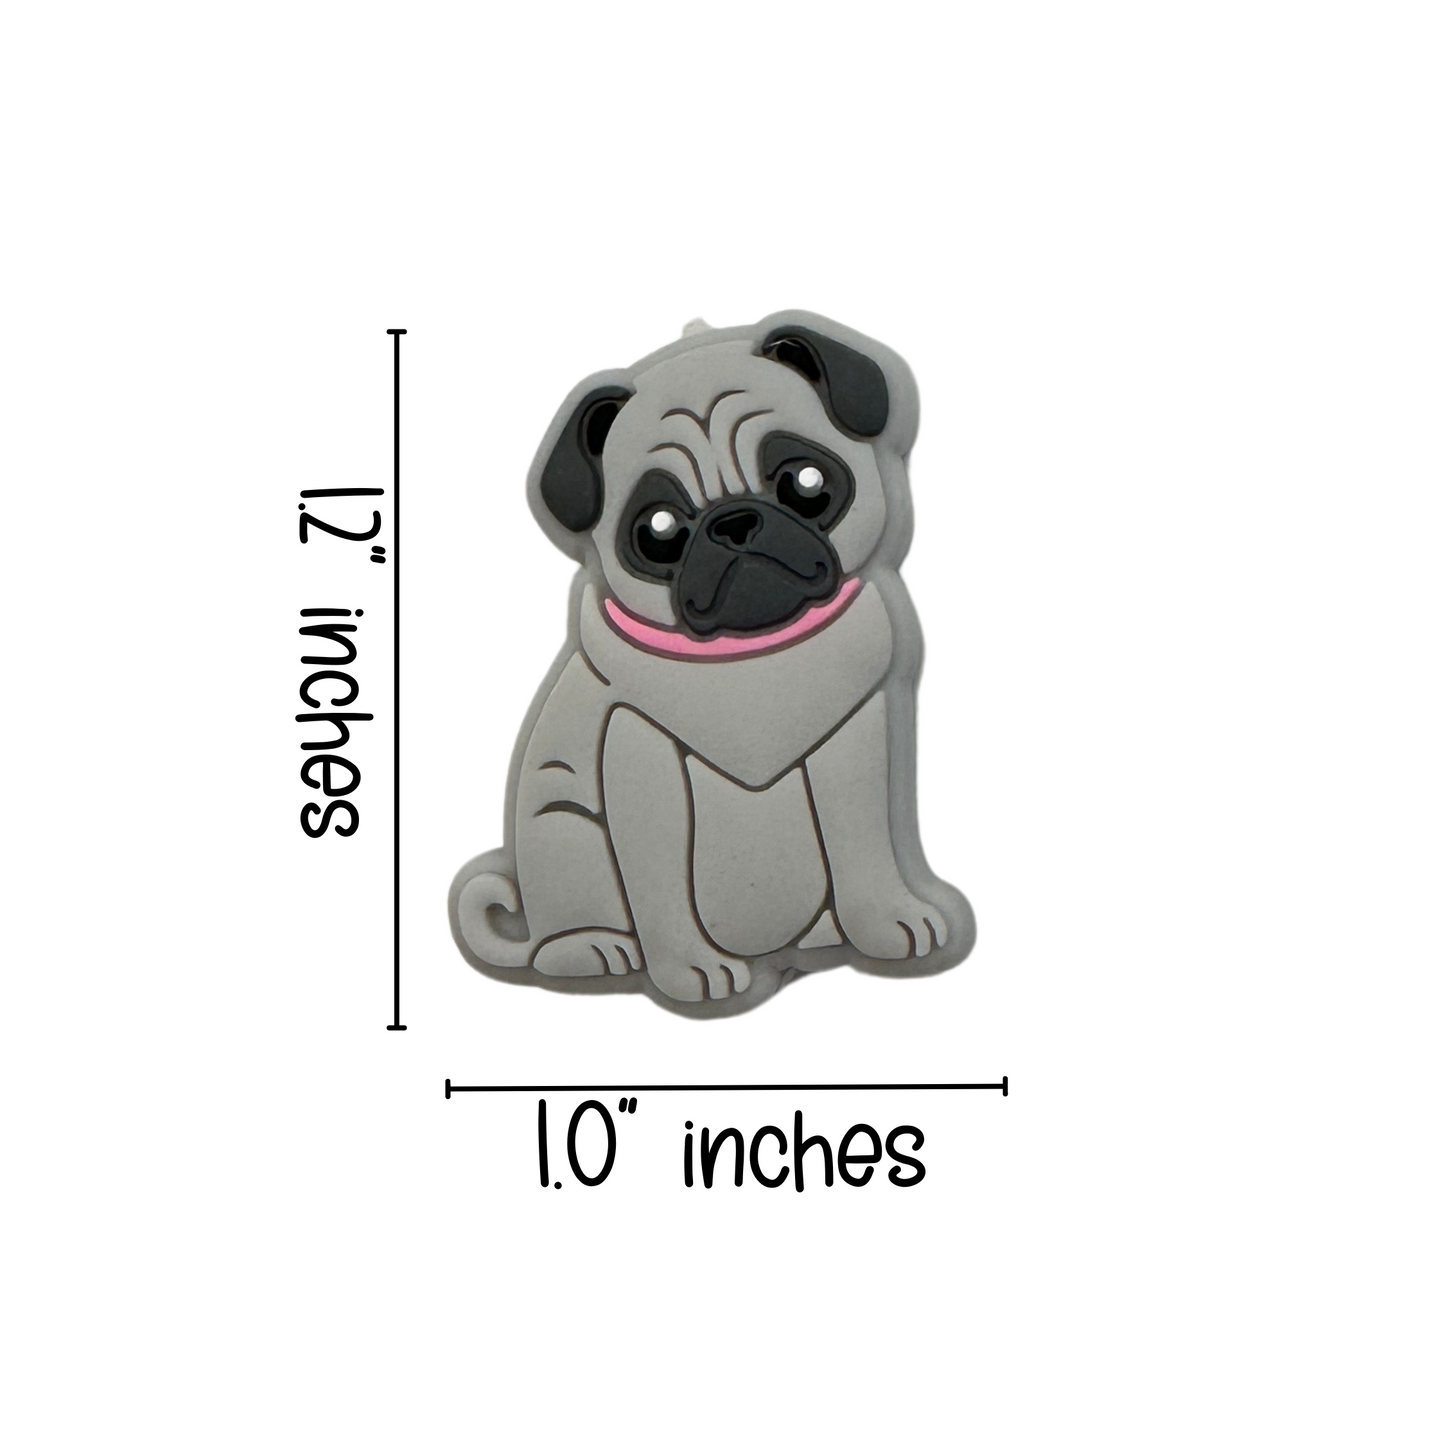 Pug Dog Silicone Focal Bead| 12 Pc Mixed Pack